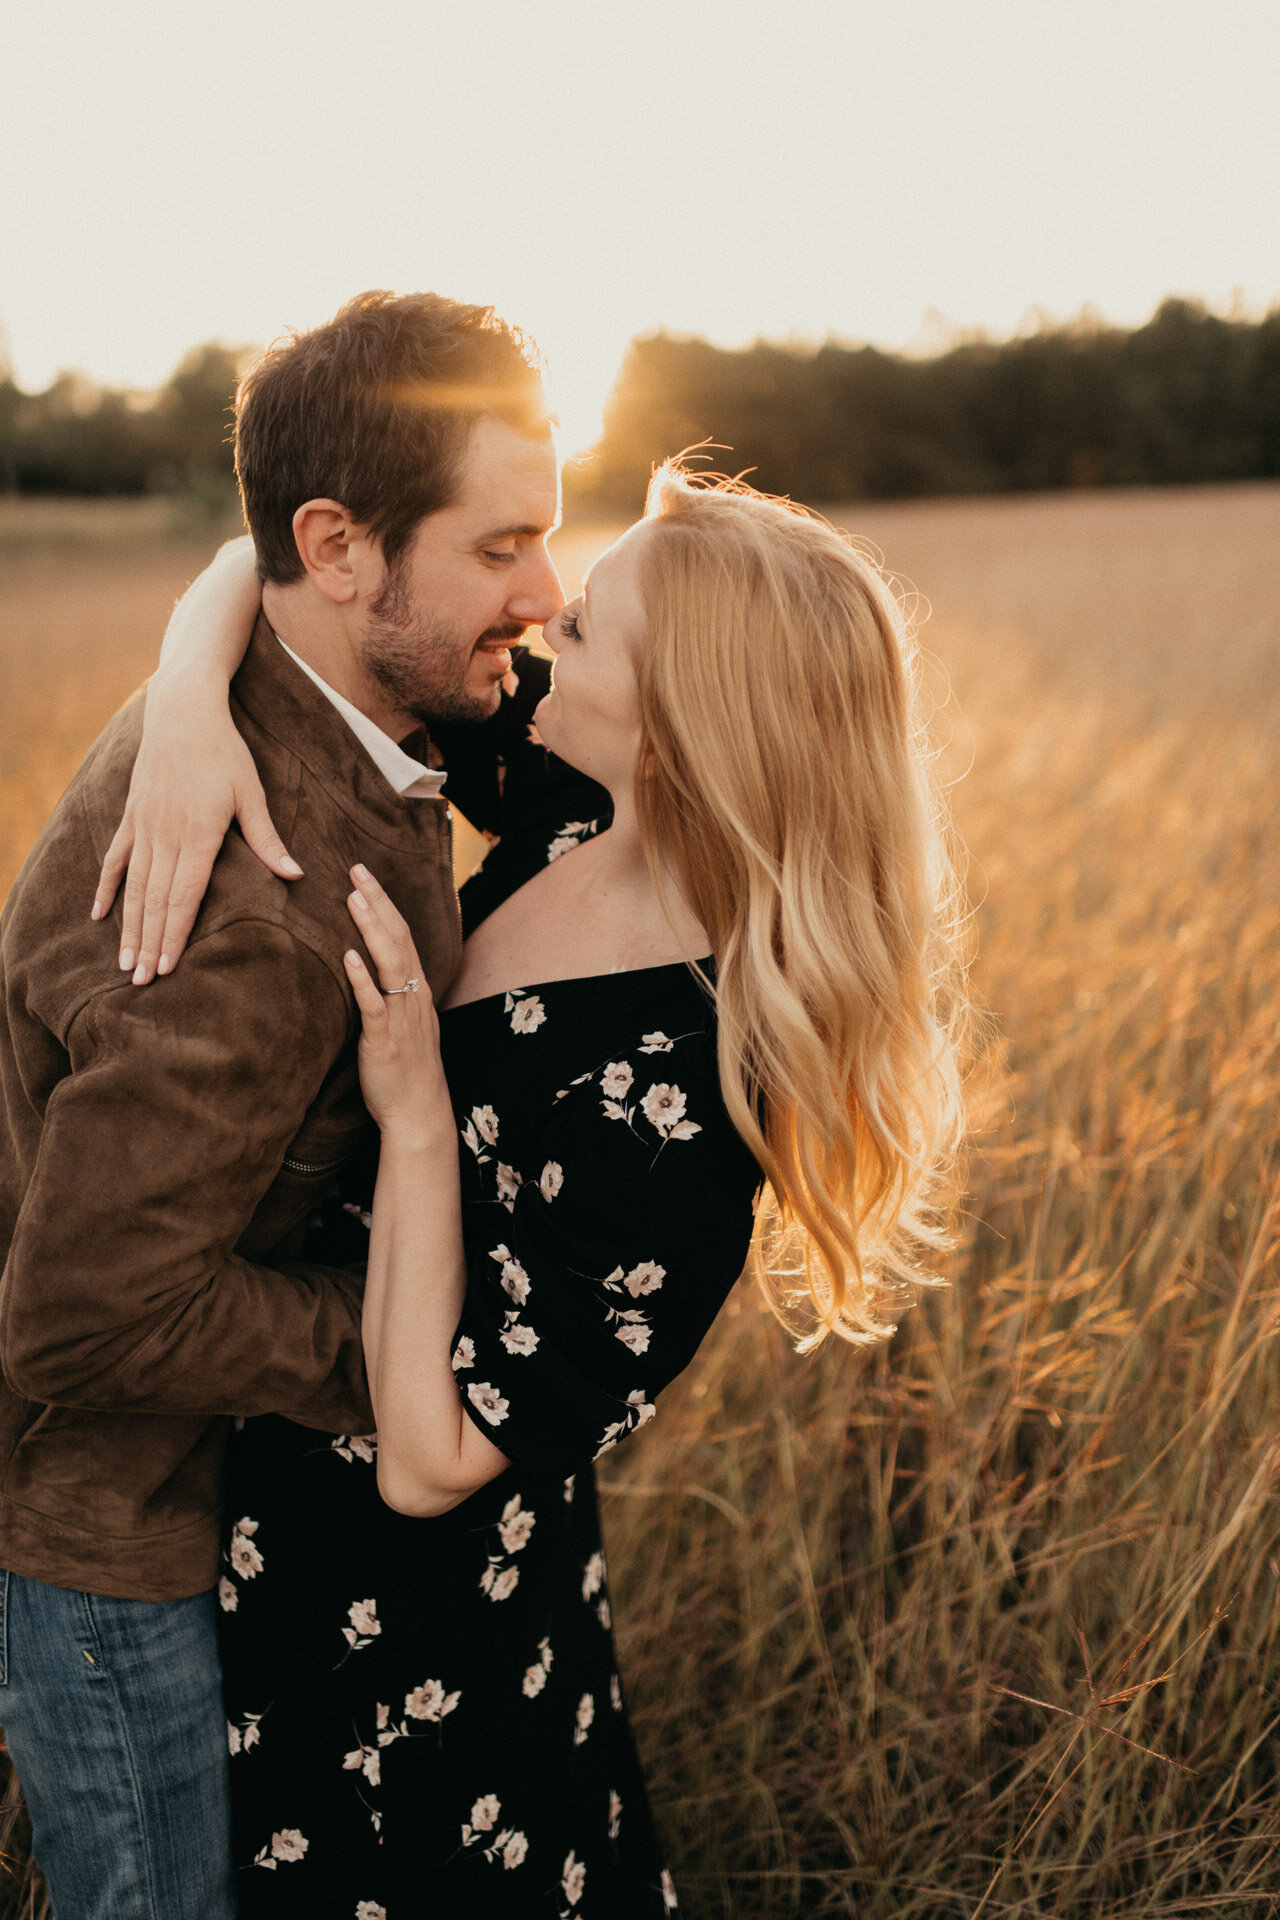 Houston Tall Grass Engagement Session — ROMANTIC, ELEGANT, AND TIMELESS ...